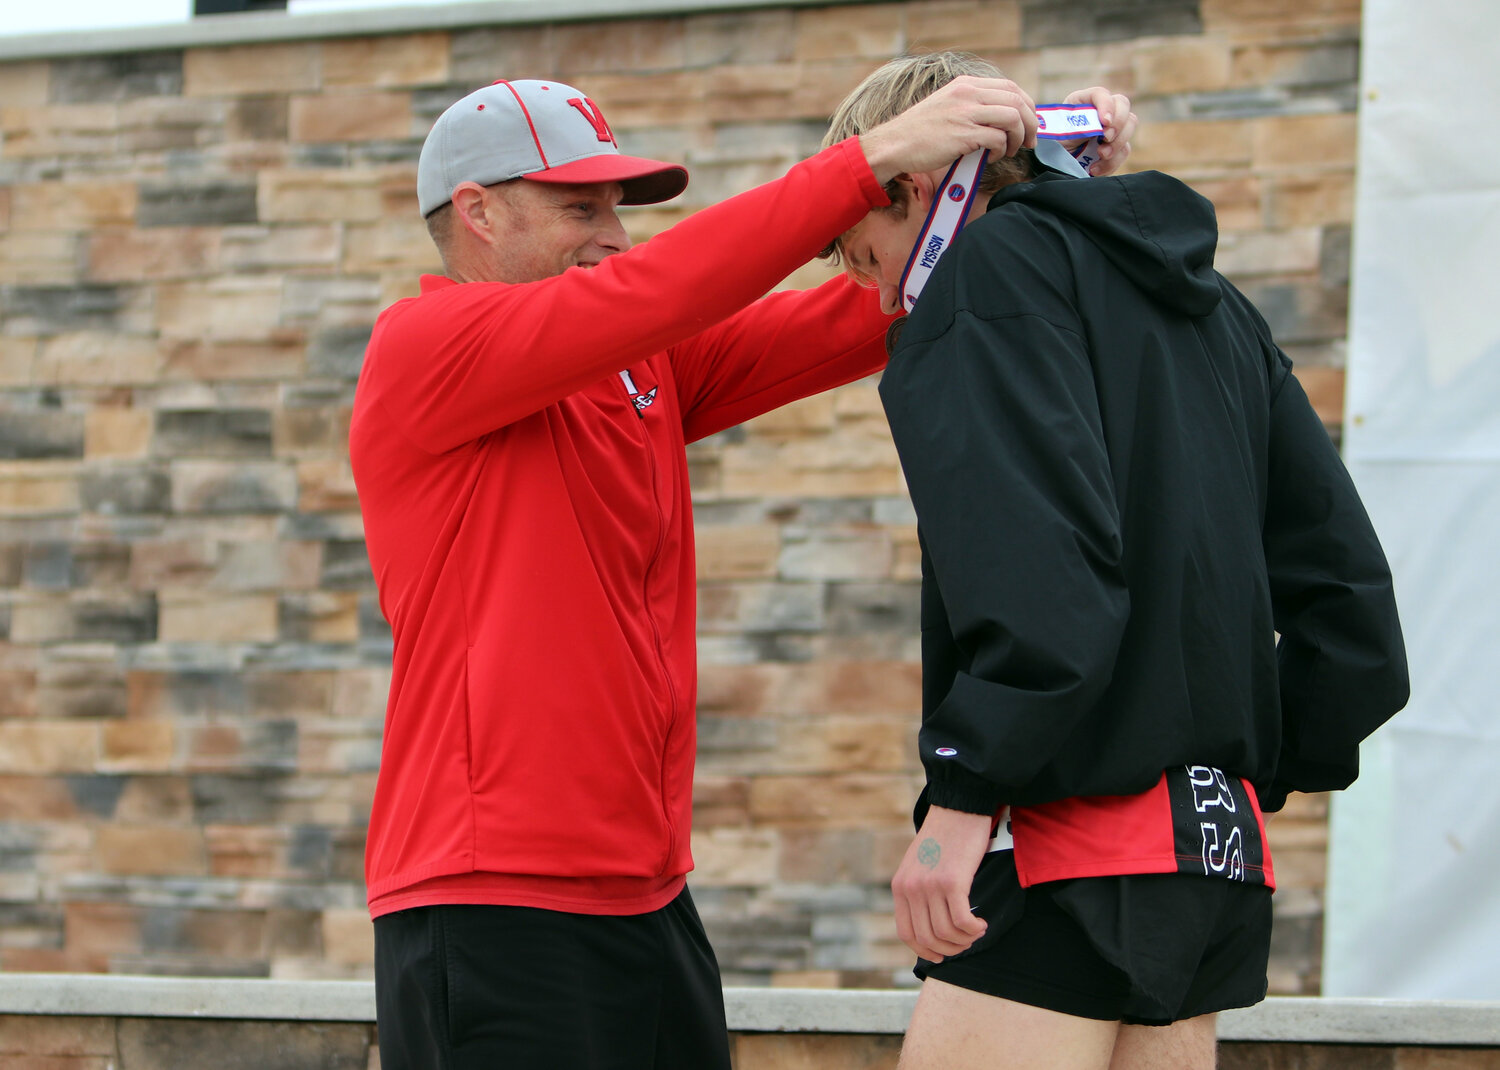 Phillip Kackley (right) receives his state medal from Warrenton head coach Jeremy Collins.